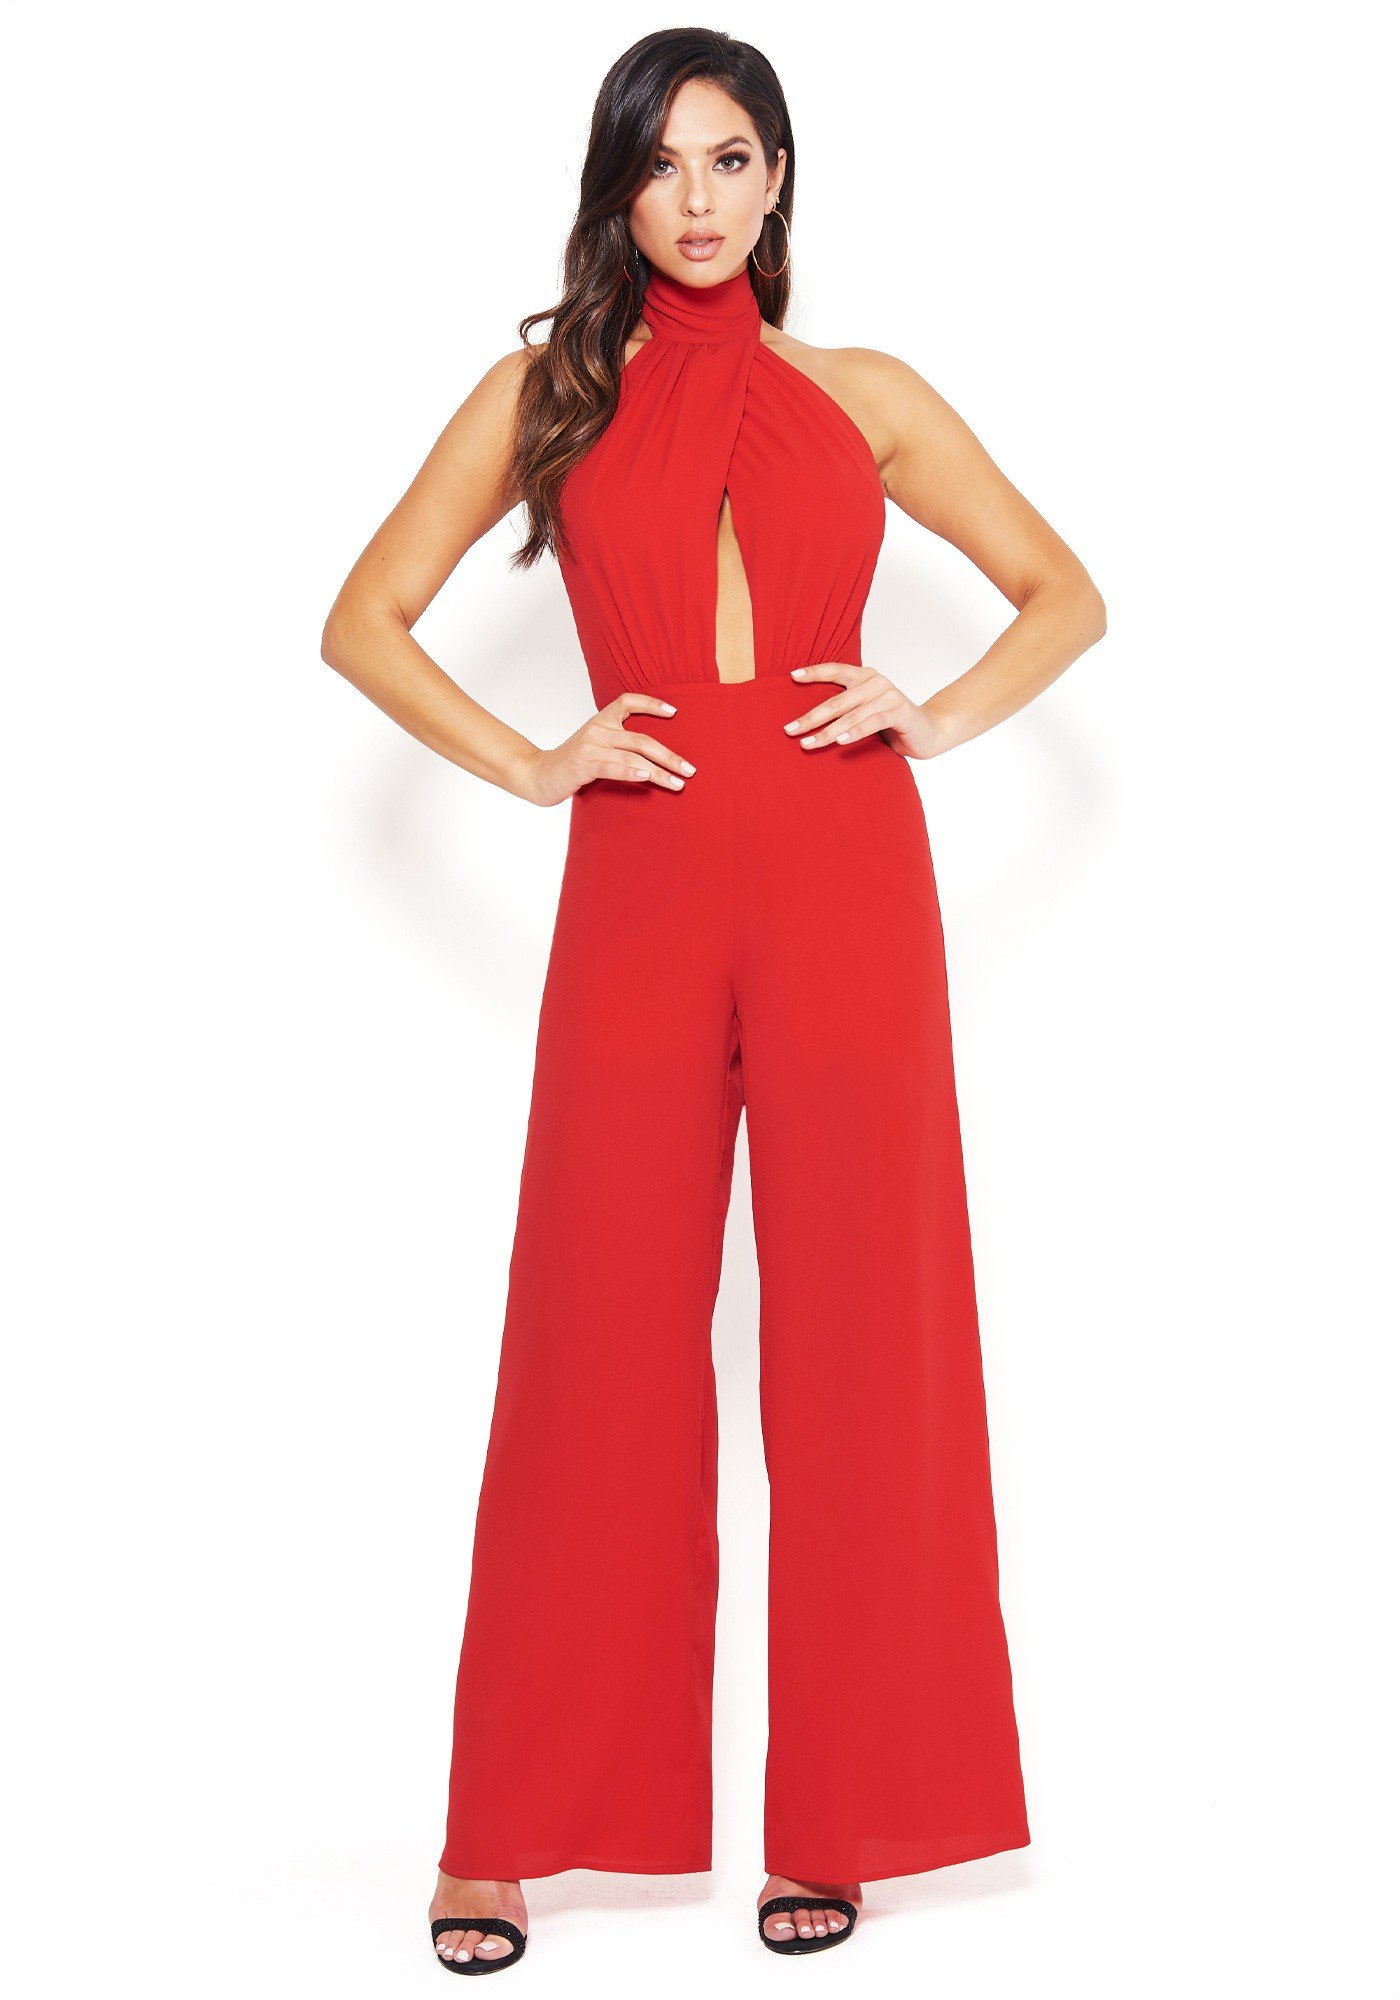 Bebe Women's Keyhole Halter Jumpsuit, Size 00 in Barbados Cherry Polyester